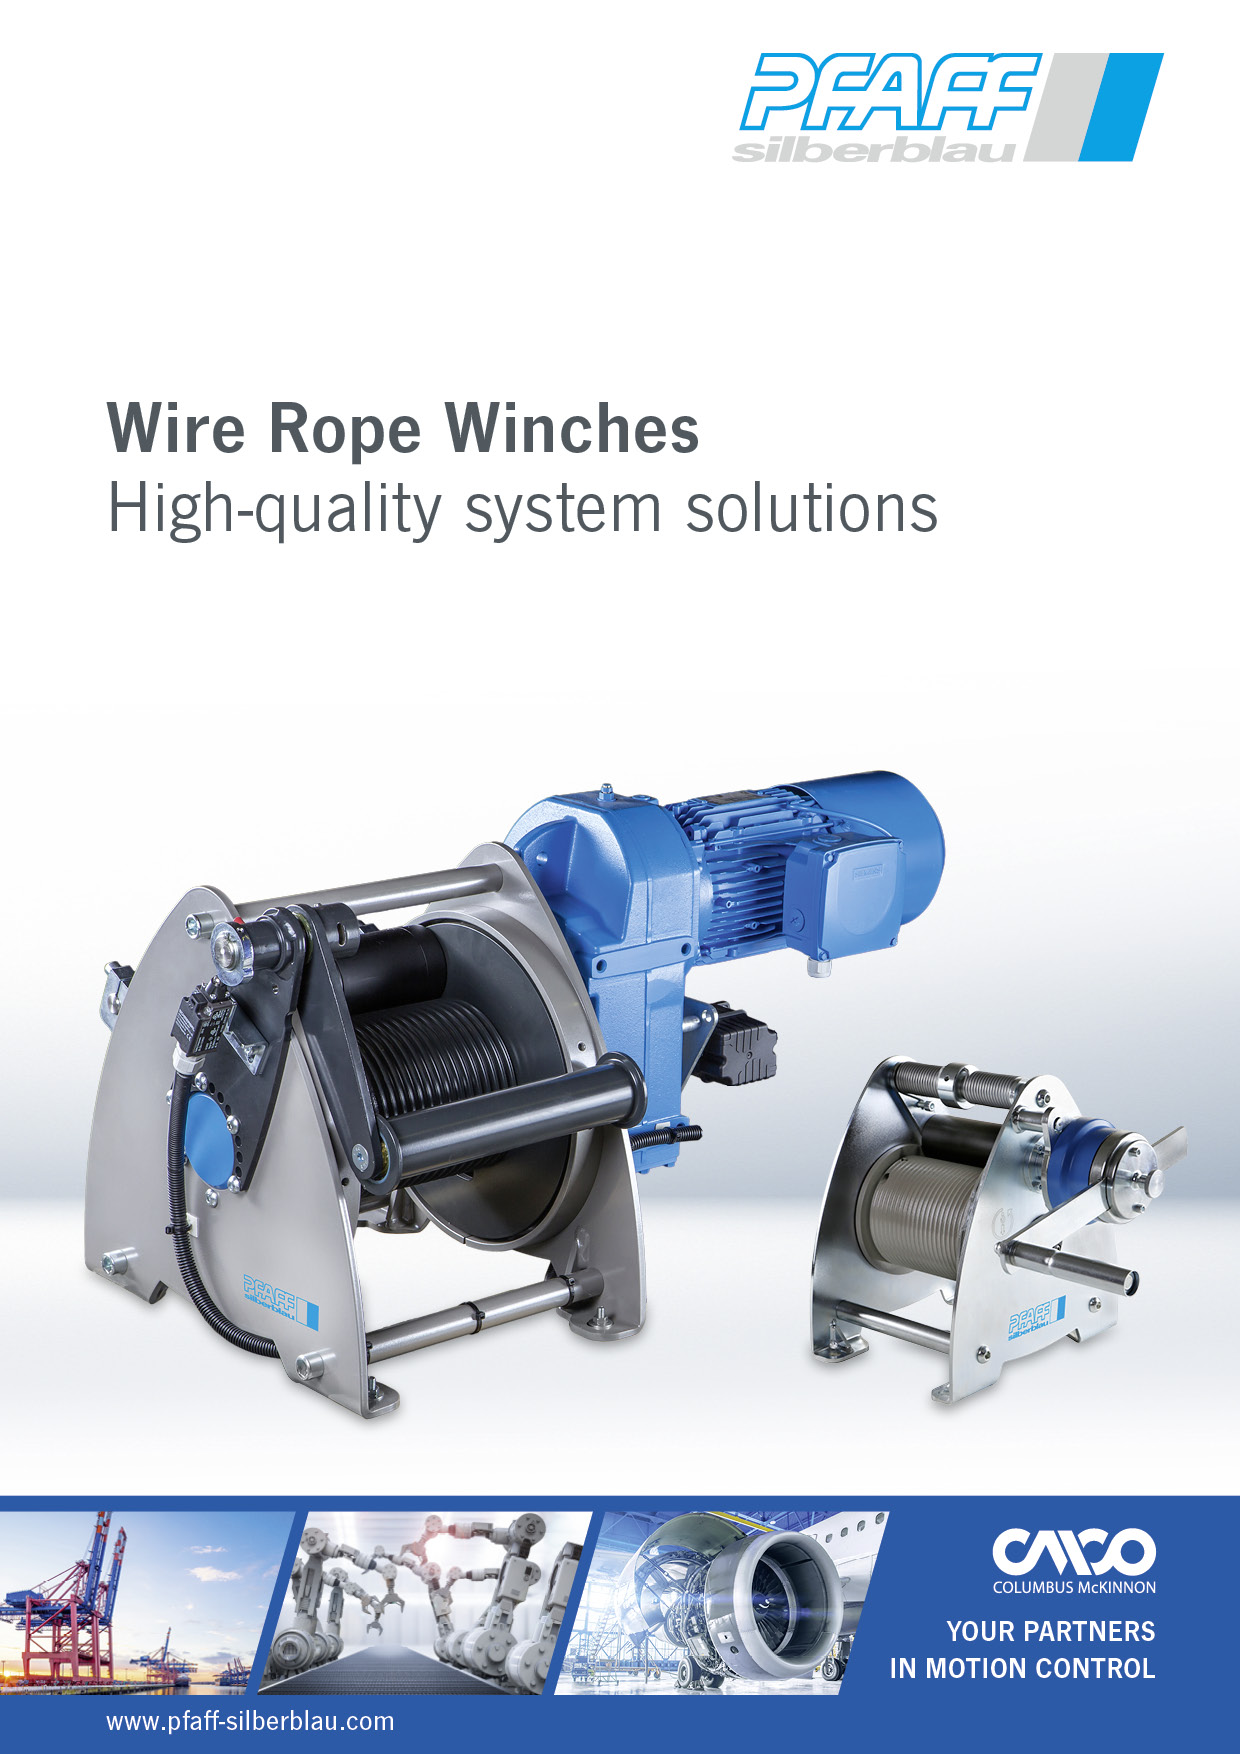 CMCO_Redesign_Wire_Rope_Winches_Title_EN.jpg